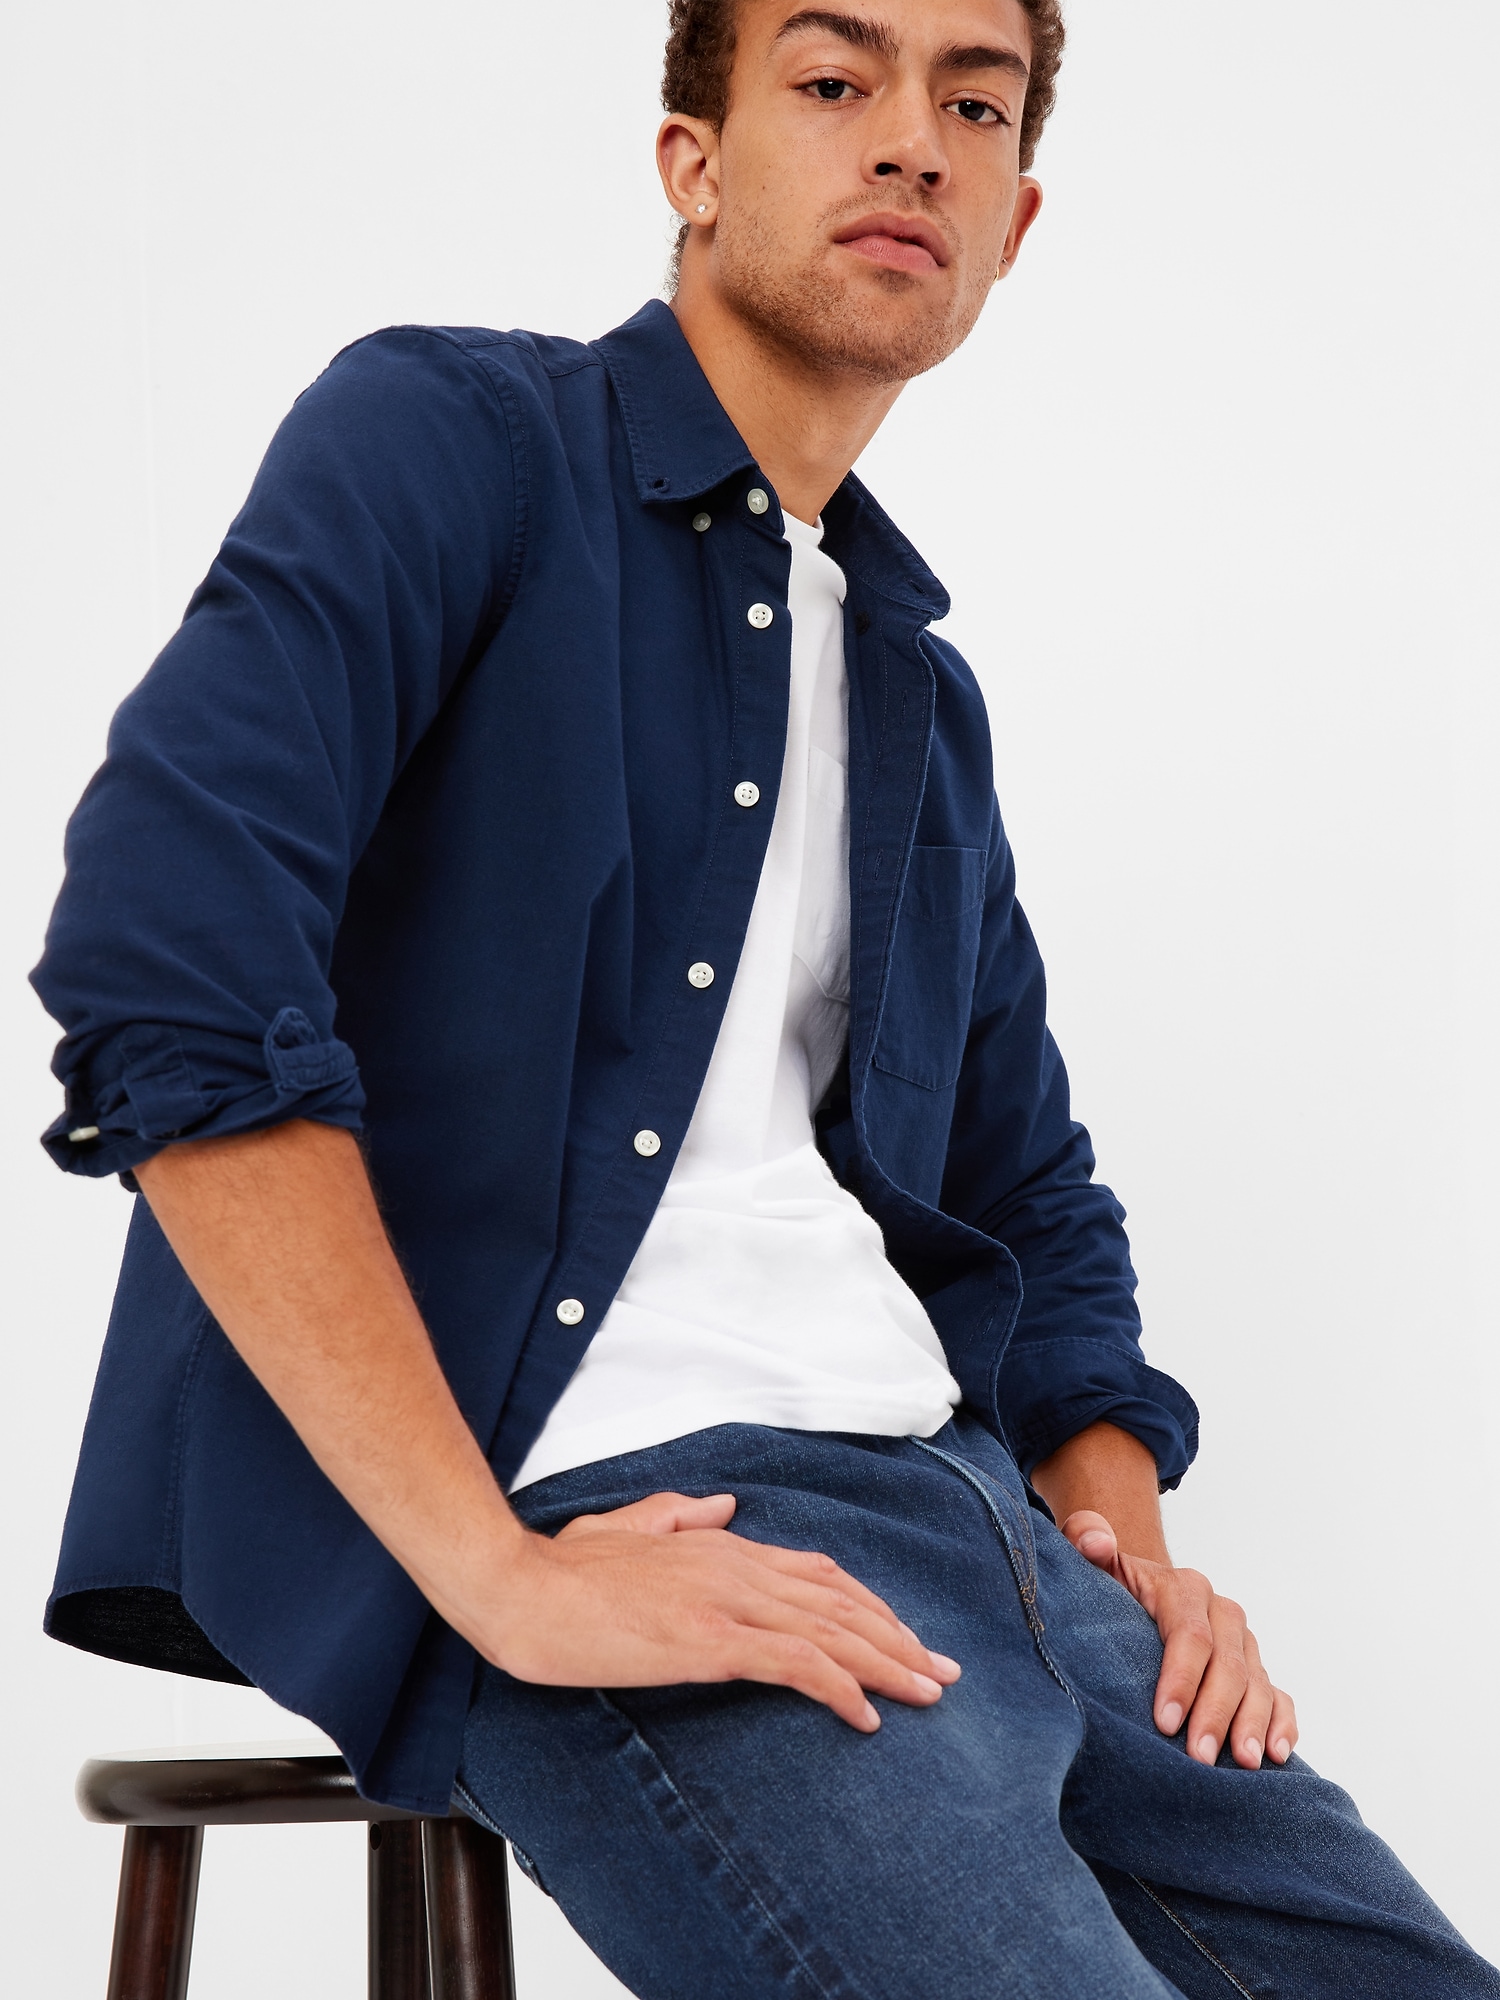 Gap Classic Oxford Shirt In Untucked Fit With In-conversion Cotton In Tapestry Navy